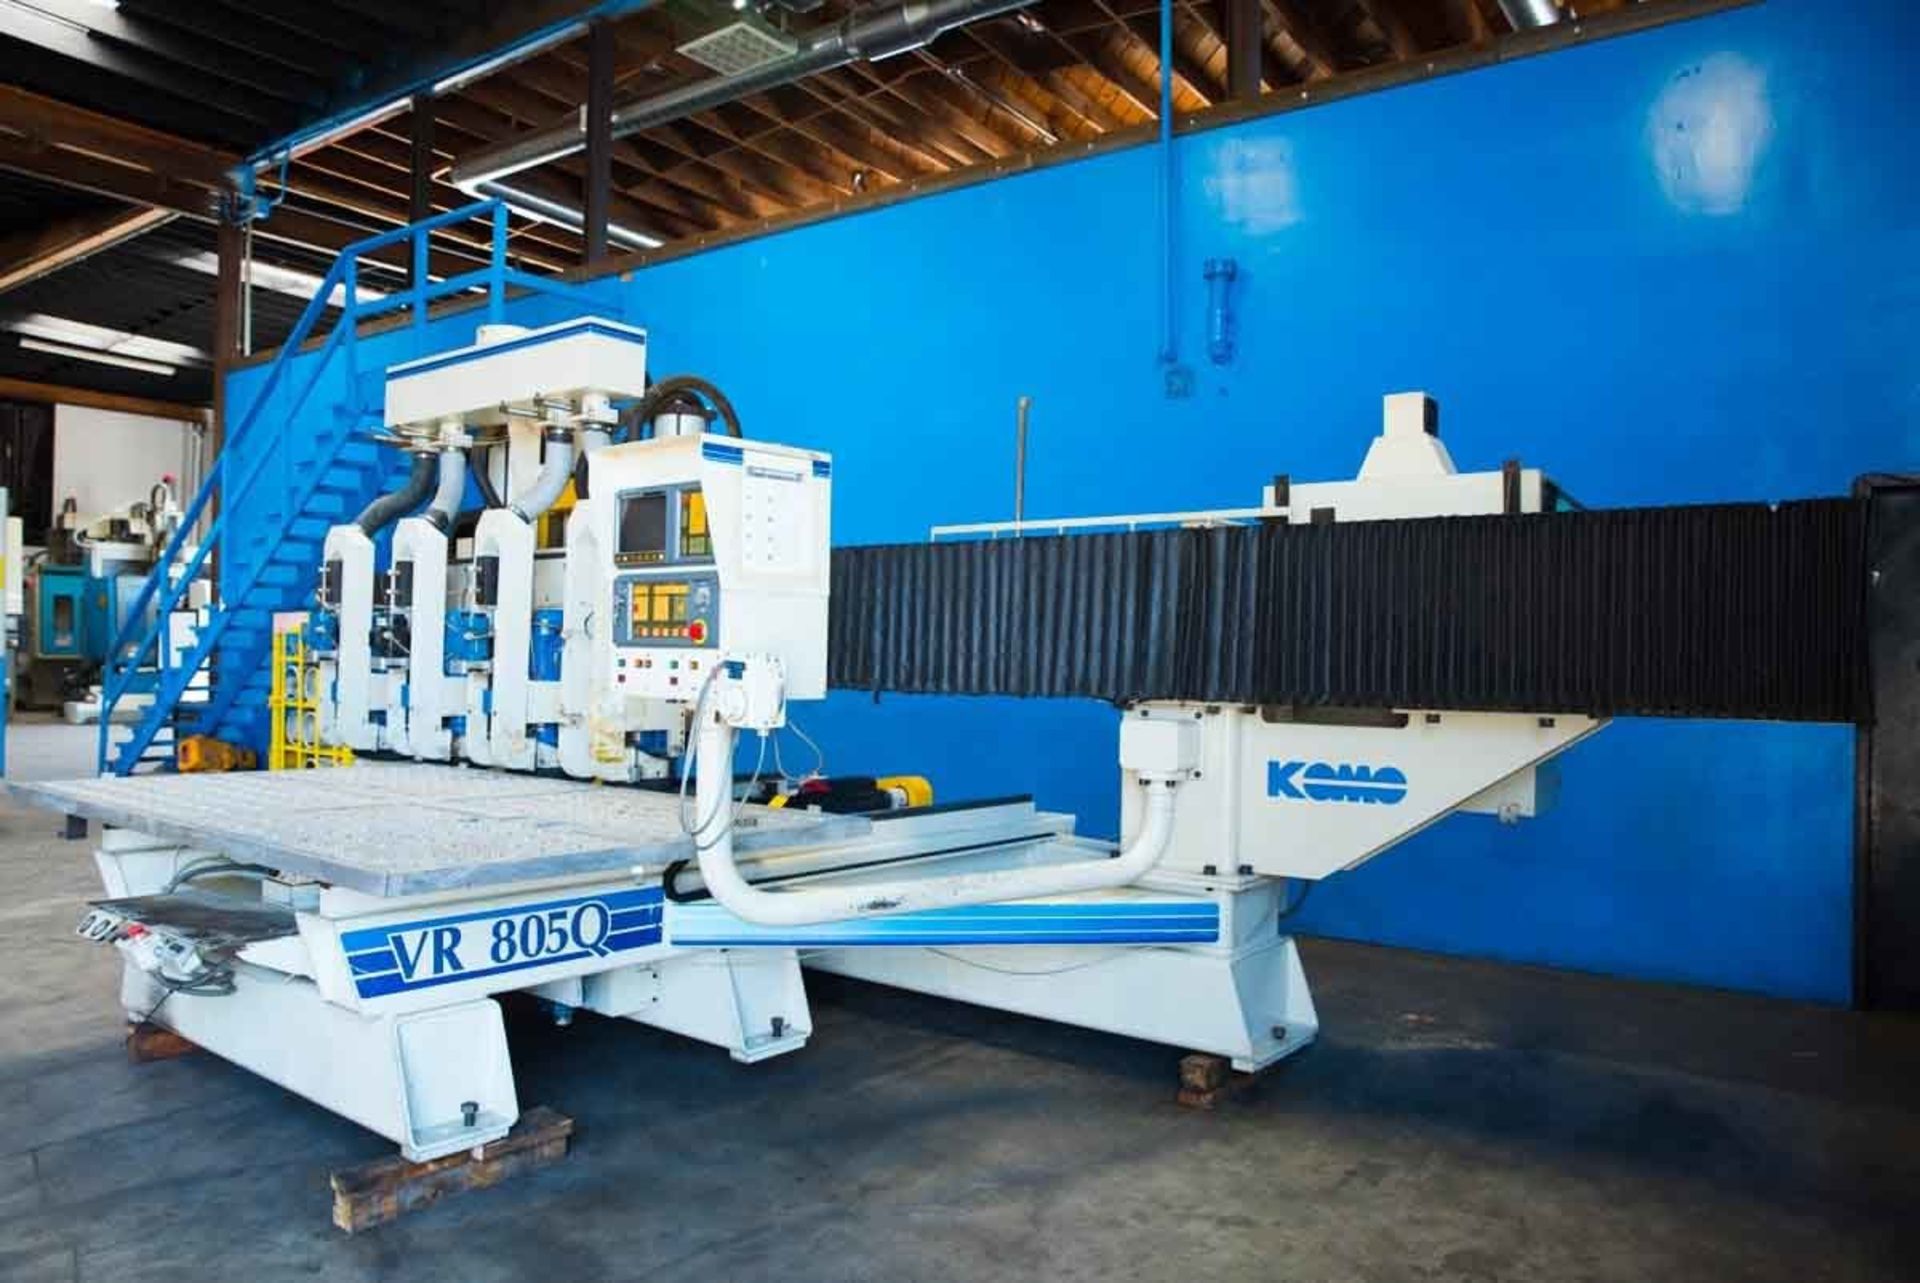 Komo VR805Q Fanuc CNC Metal Router 3 Axis 4 Spindle 96" x 60" Sheet Size - Located In: Huntington - Image 2 of 25